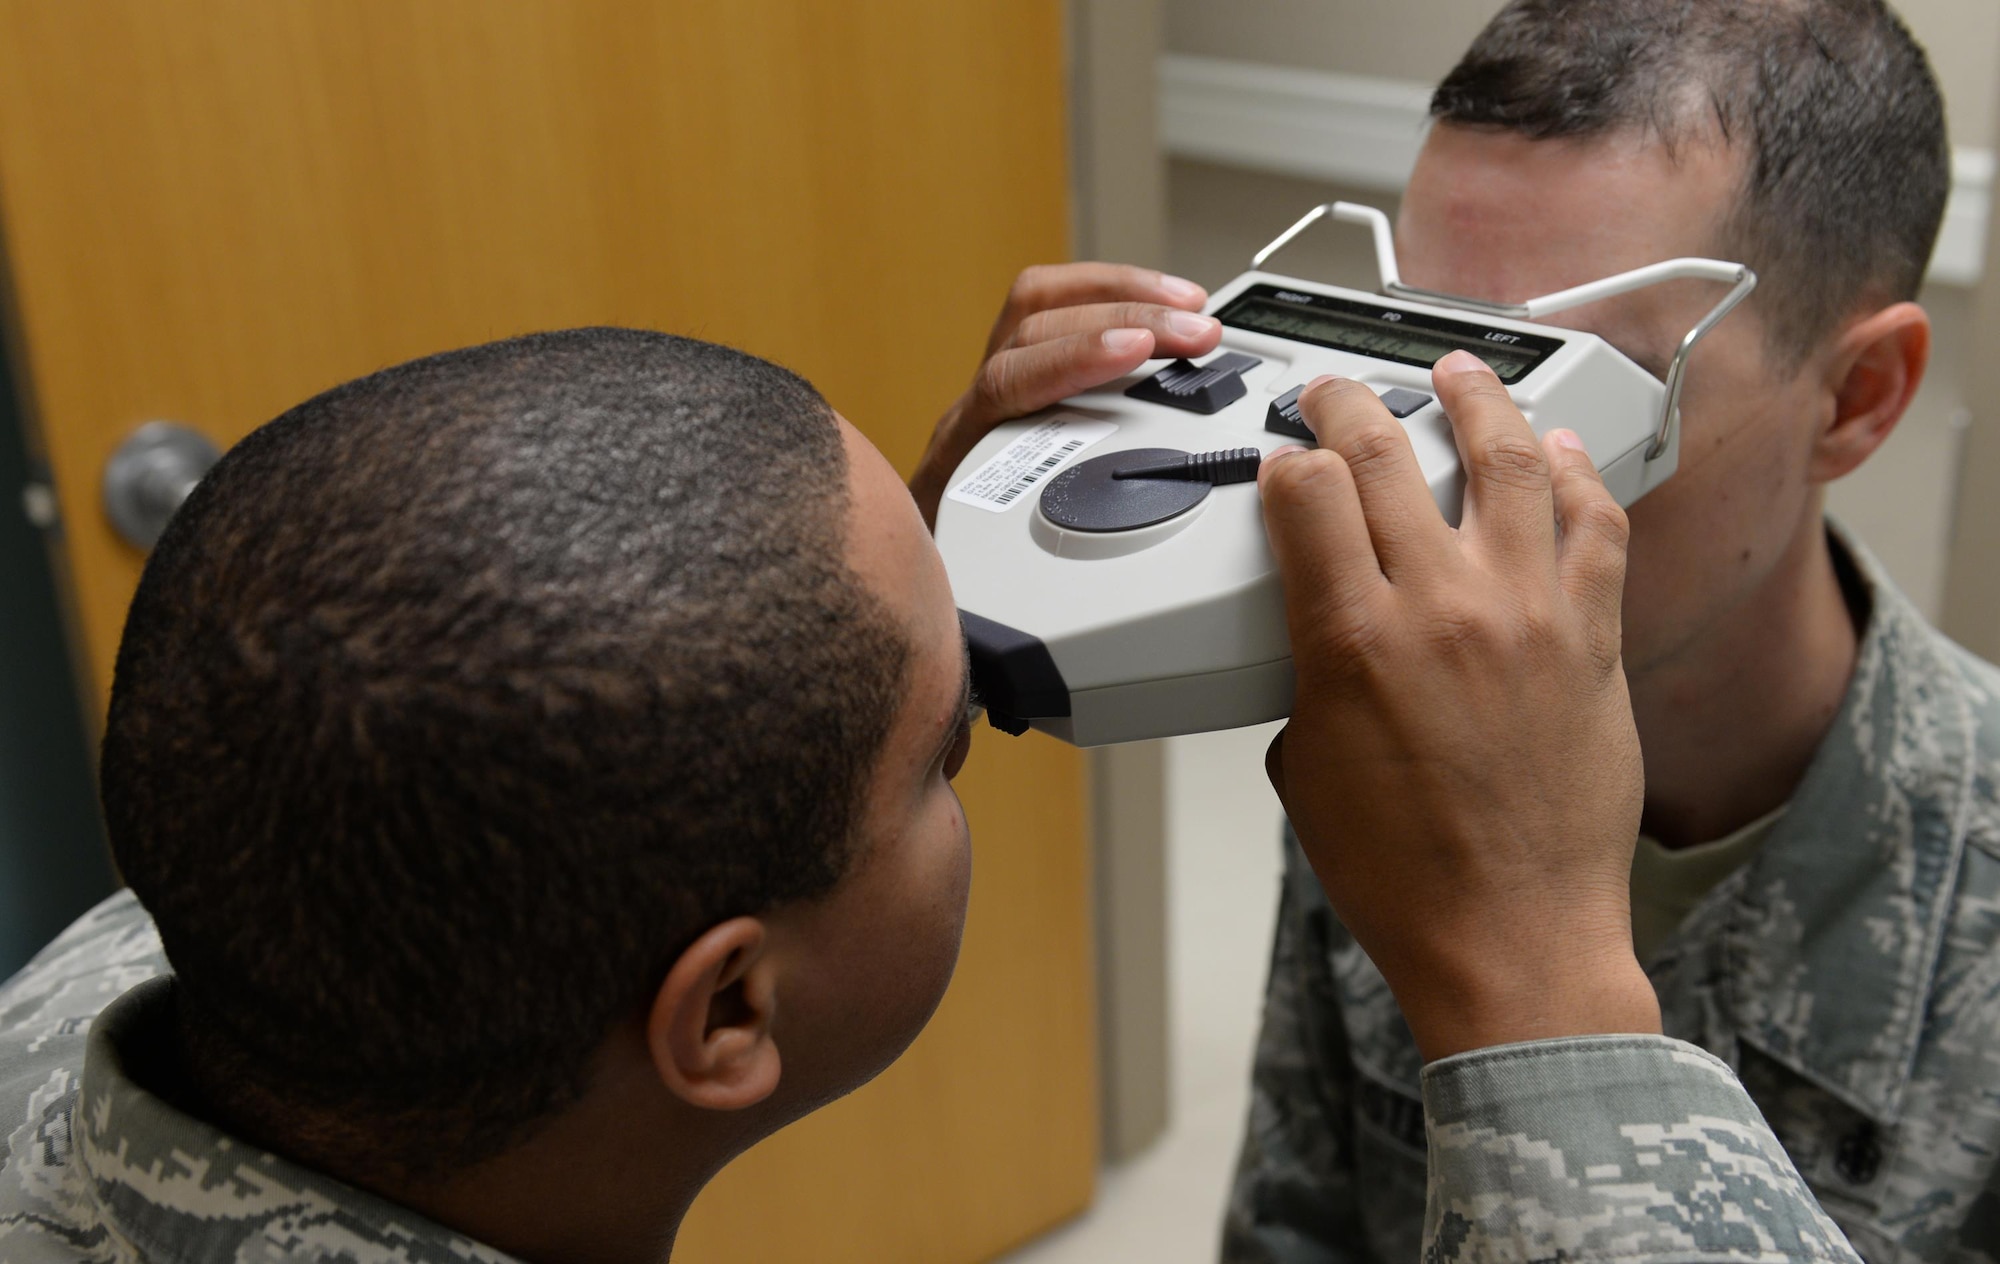 Senior Airman Randolph Callender, 36th Medical Operations Squadron optometry technician, left, uses a pupilometer to measure the distance between the pupils of Tech. Sgt. Jeremy Foster, 36th MDOS optometry technician, Jan. 27, 2016, at Andersen Air Force Base, Guam. The pupilometer is used in place of a millimeter ruler for fitting eyeglasses. (U.S. Air Force Photo/Airman 1st Class Jacob Skovo)